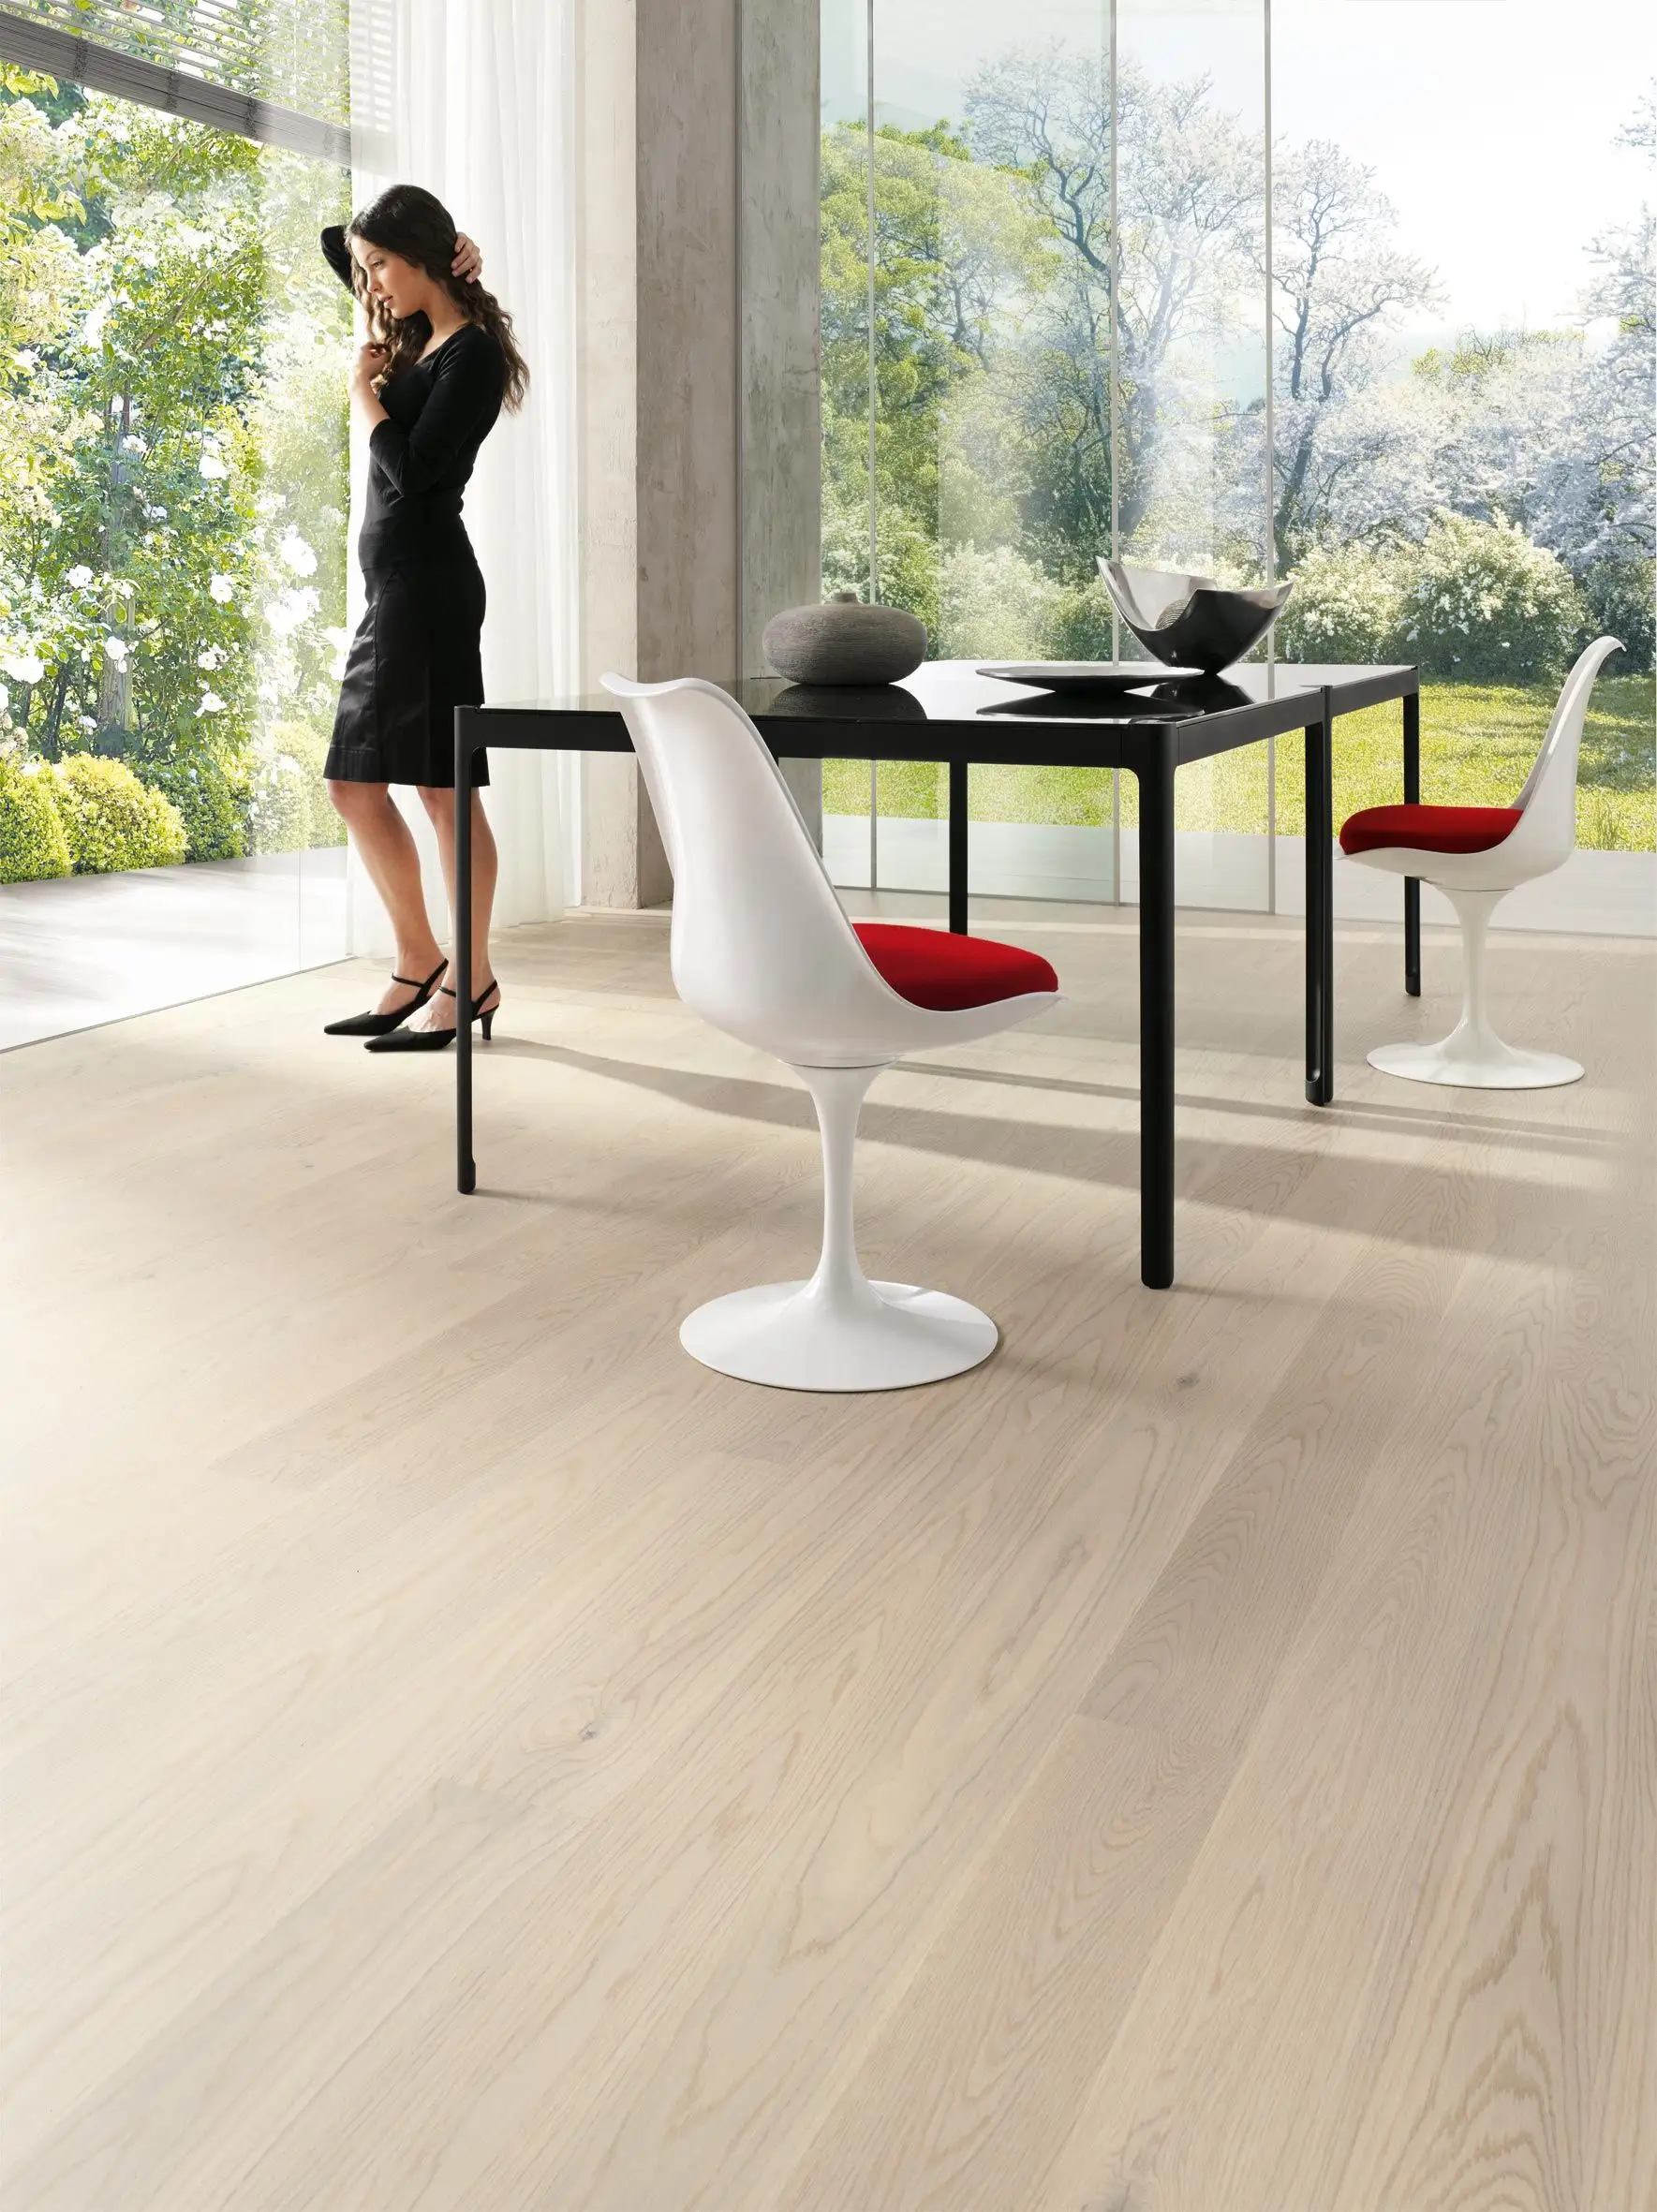 Do you know anything about laminate flooring